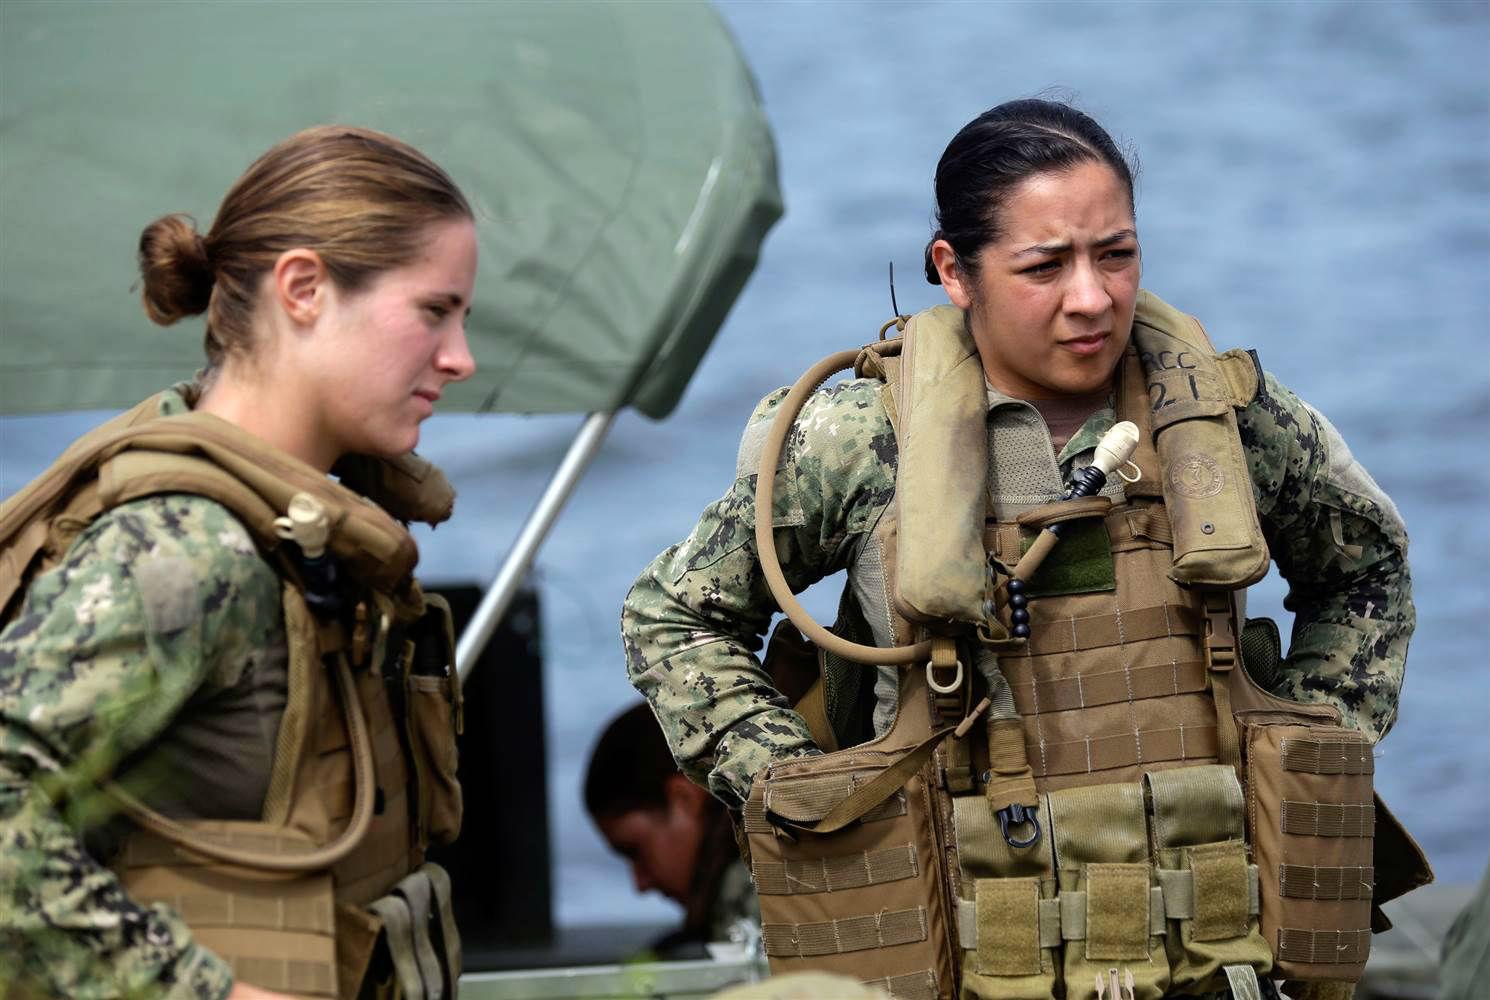 Woman becomes US Navy's first female SEAL candidate, The Independent